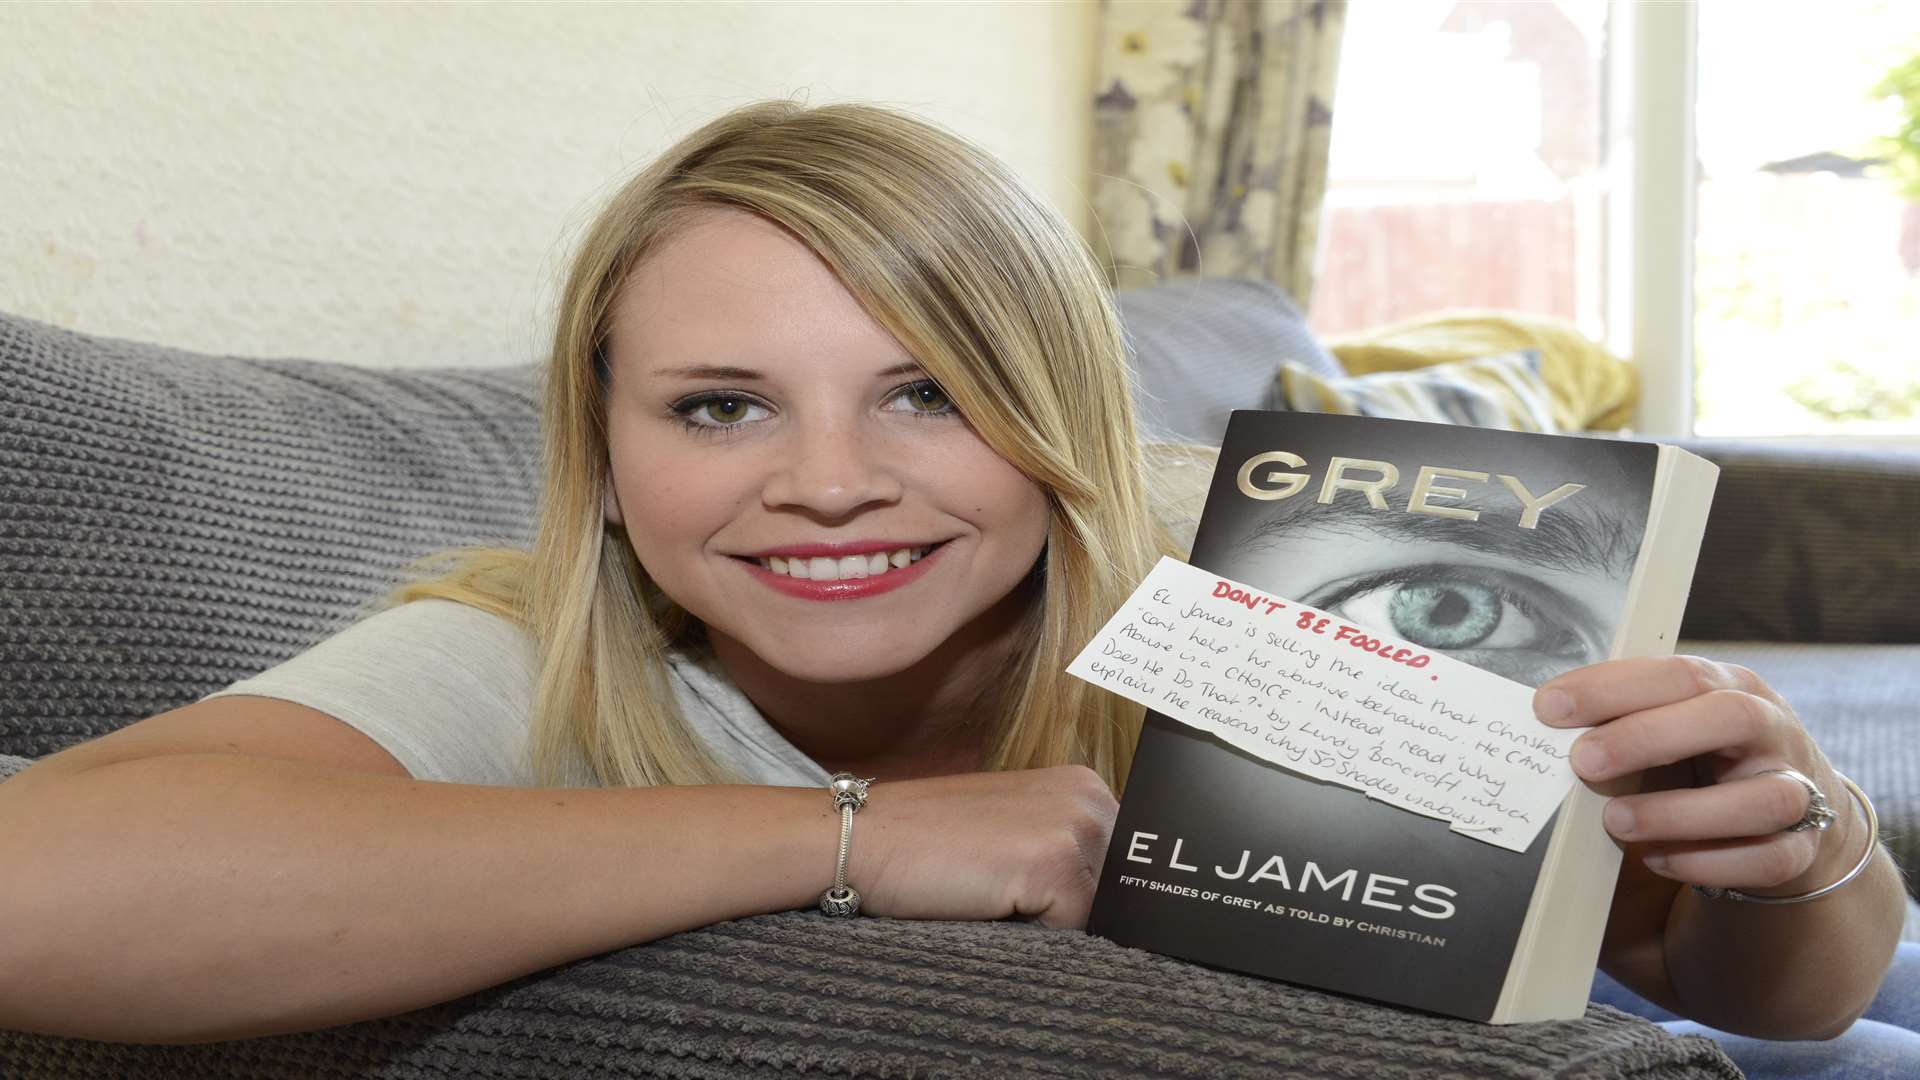 Chloe Darling with the note she found in her Fifty Shades of Grey Book